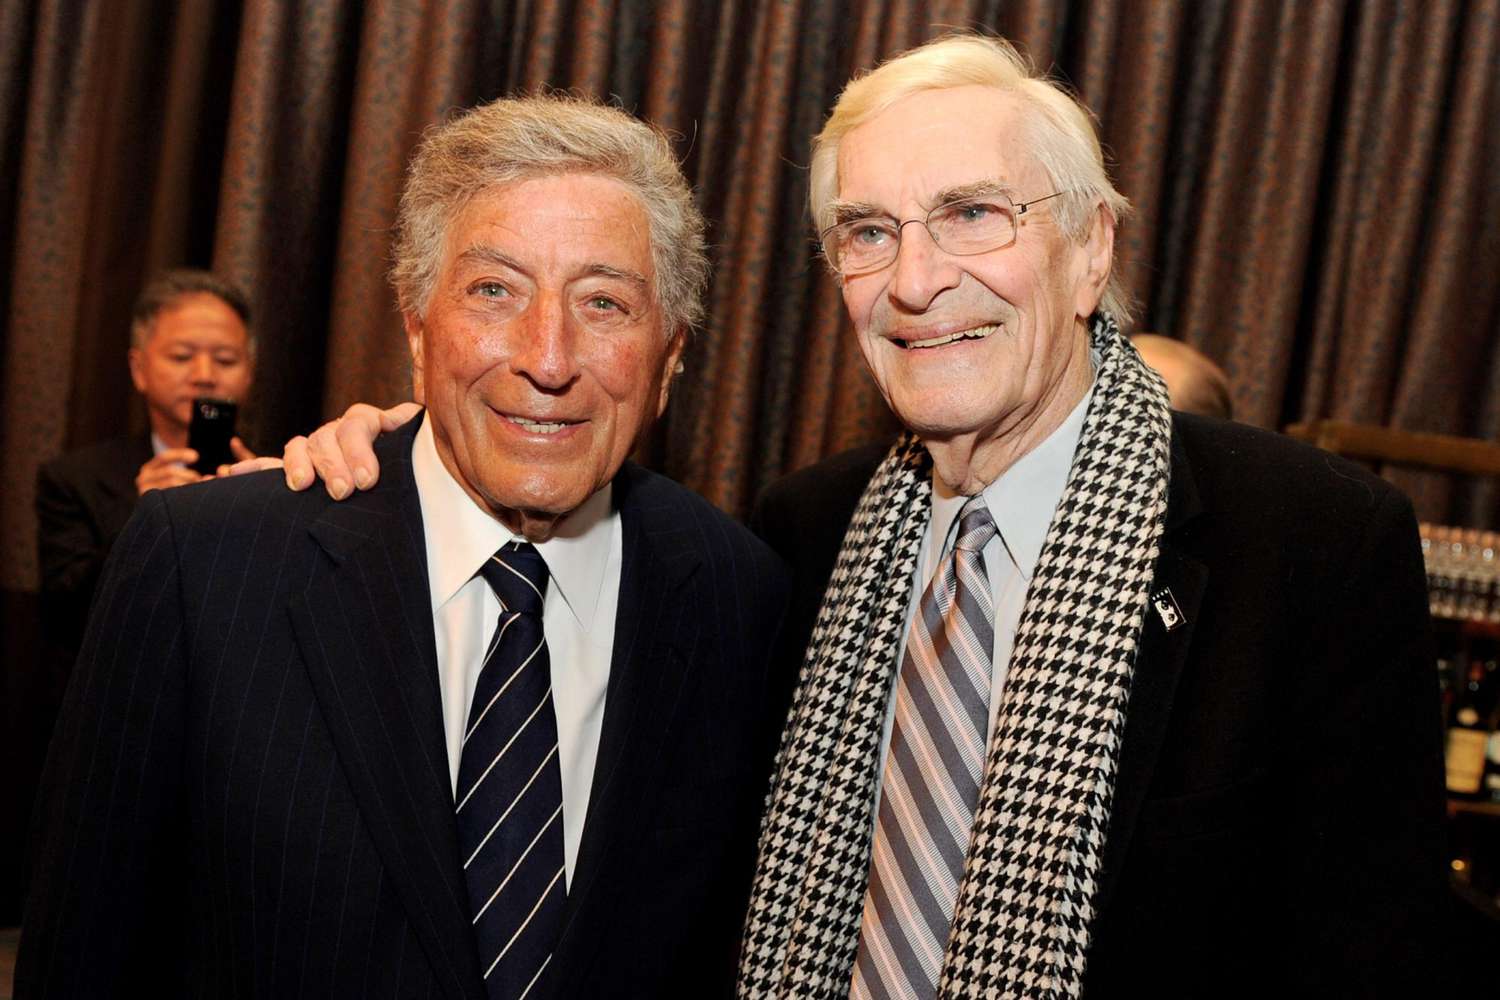 Tony Bennett and Landau at AARP Magazine's 10th Annual Movies For Grownups Awards Gala in at the Beverly Wilshire Hotel in Beverly Hills, 2011